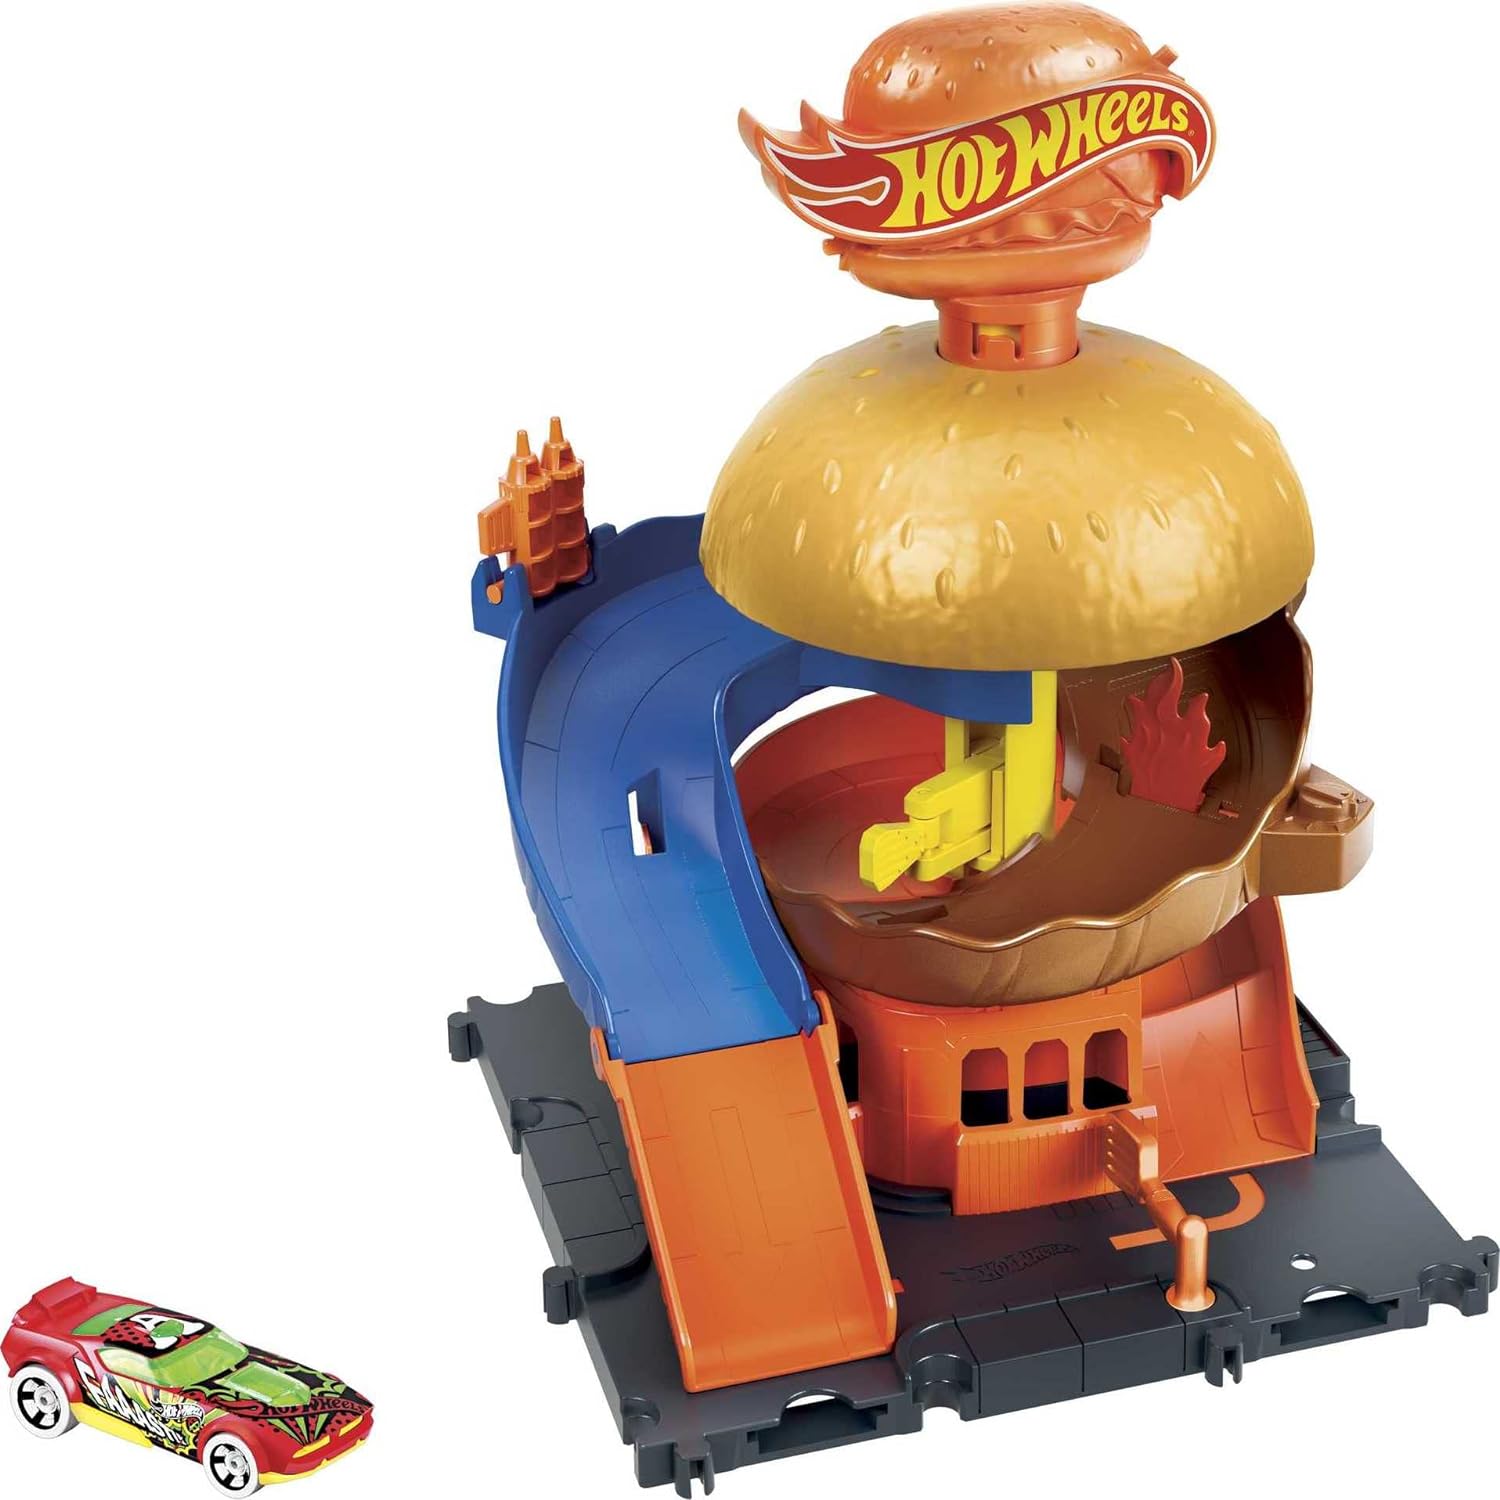 Hot Wheels Toy Car Track Set City Burger Drive-Thru Playset & 1:64 Scale Car, Connects to Other Sets & Tracks